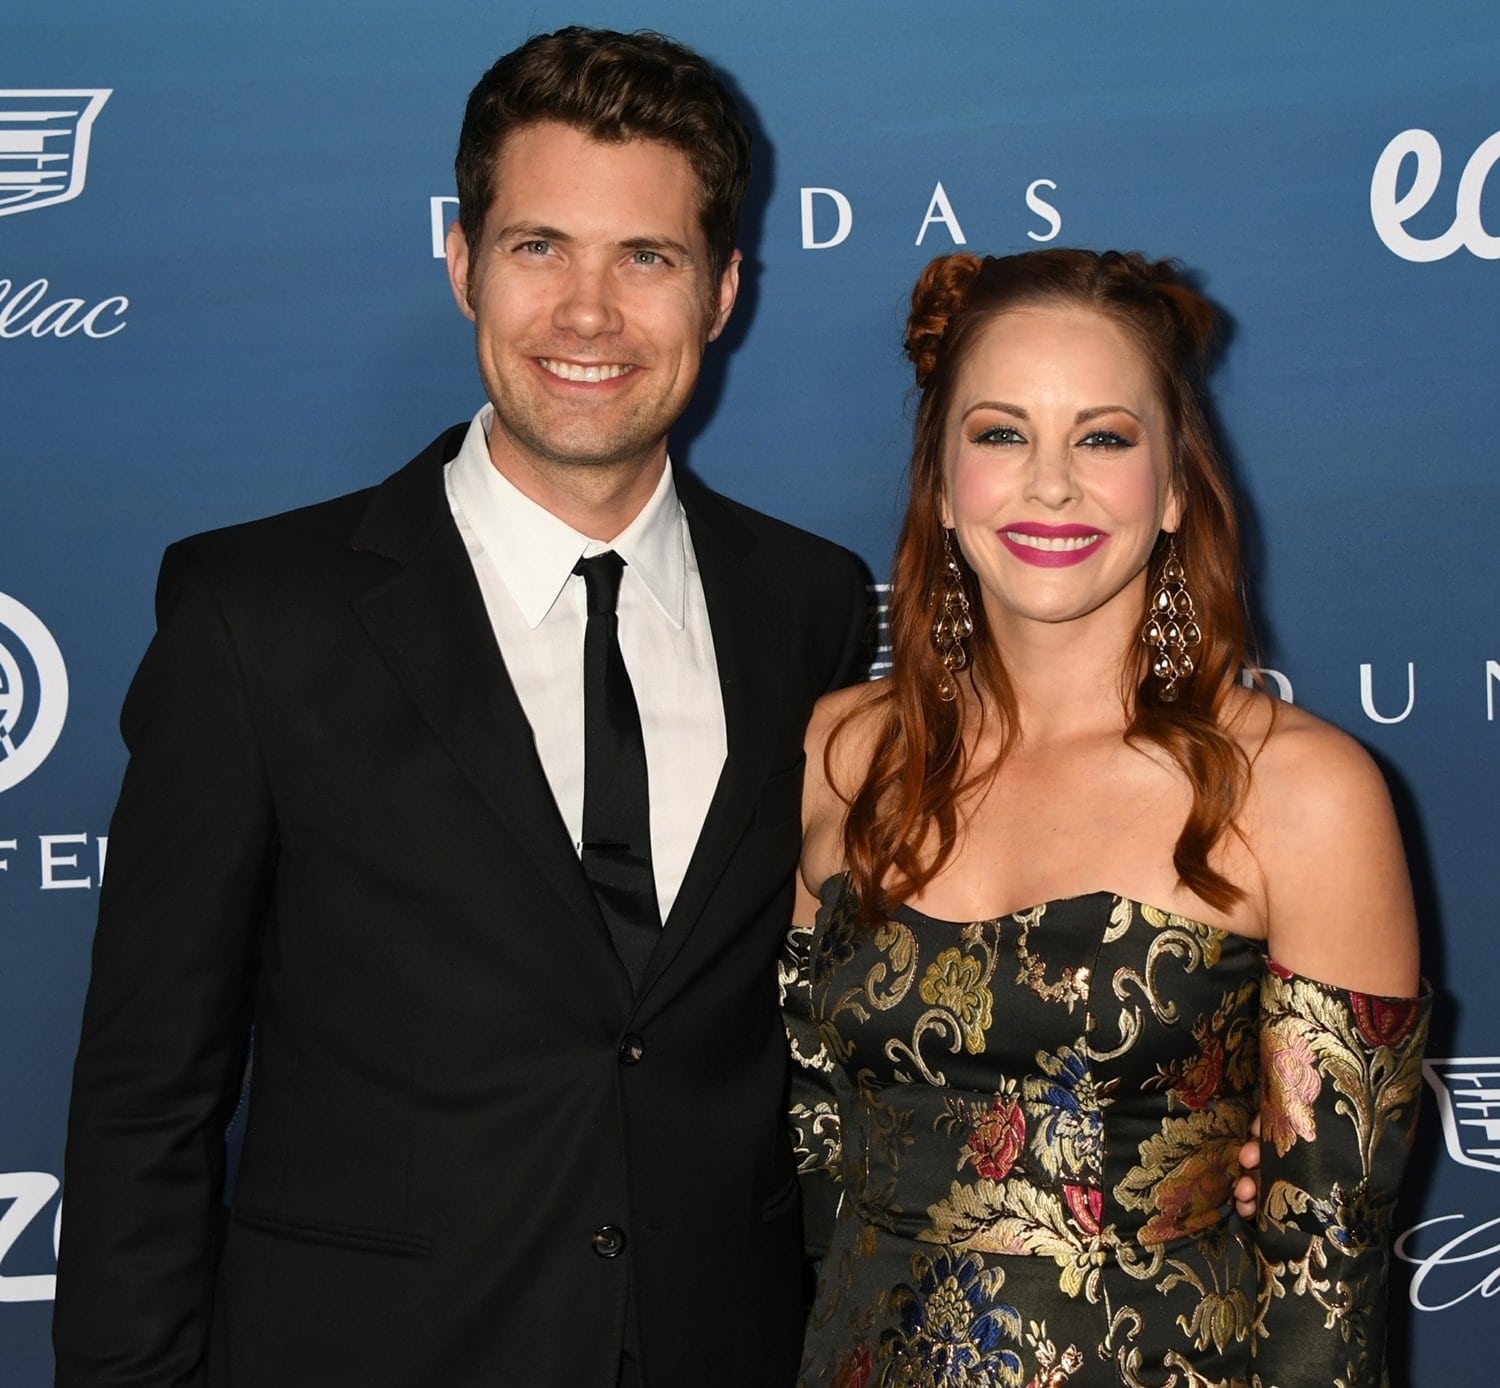 Drew Seeley, who sang most of Zac Efron's part in High School Musical while Zac lip synced, and his wife Amy Paffrath attend Michael Muller's HEAVEN